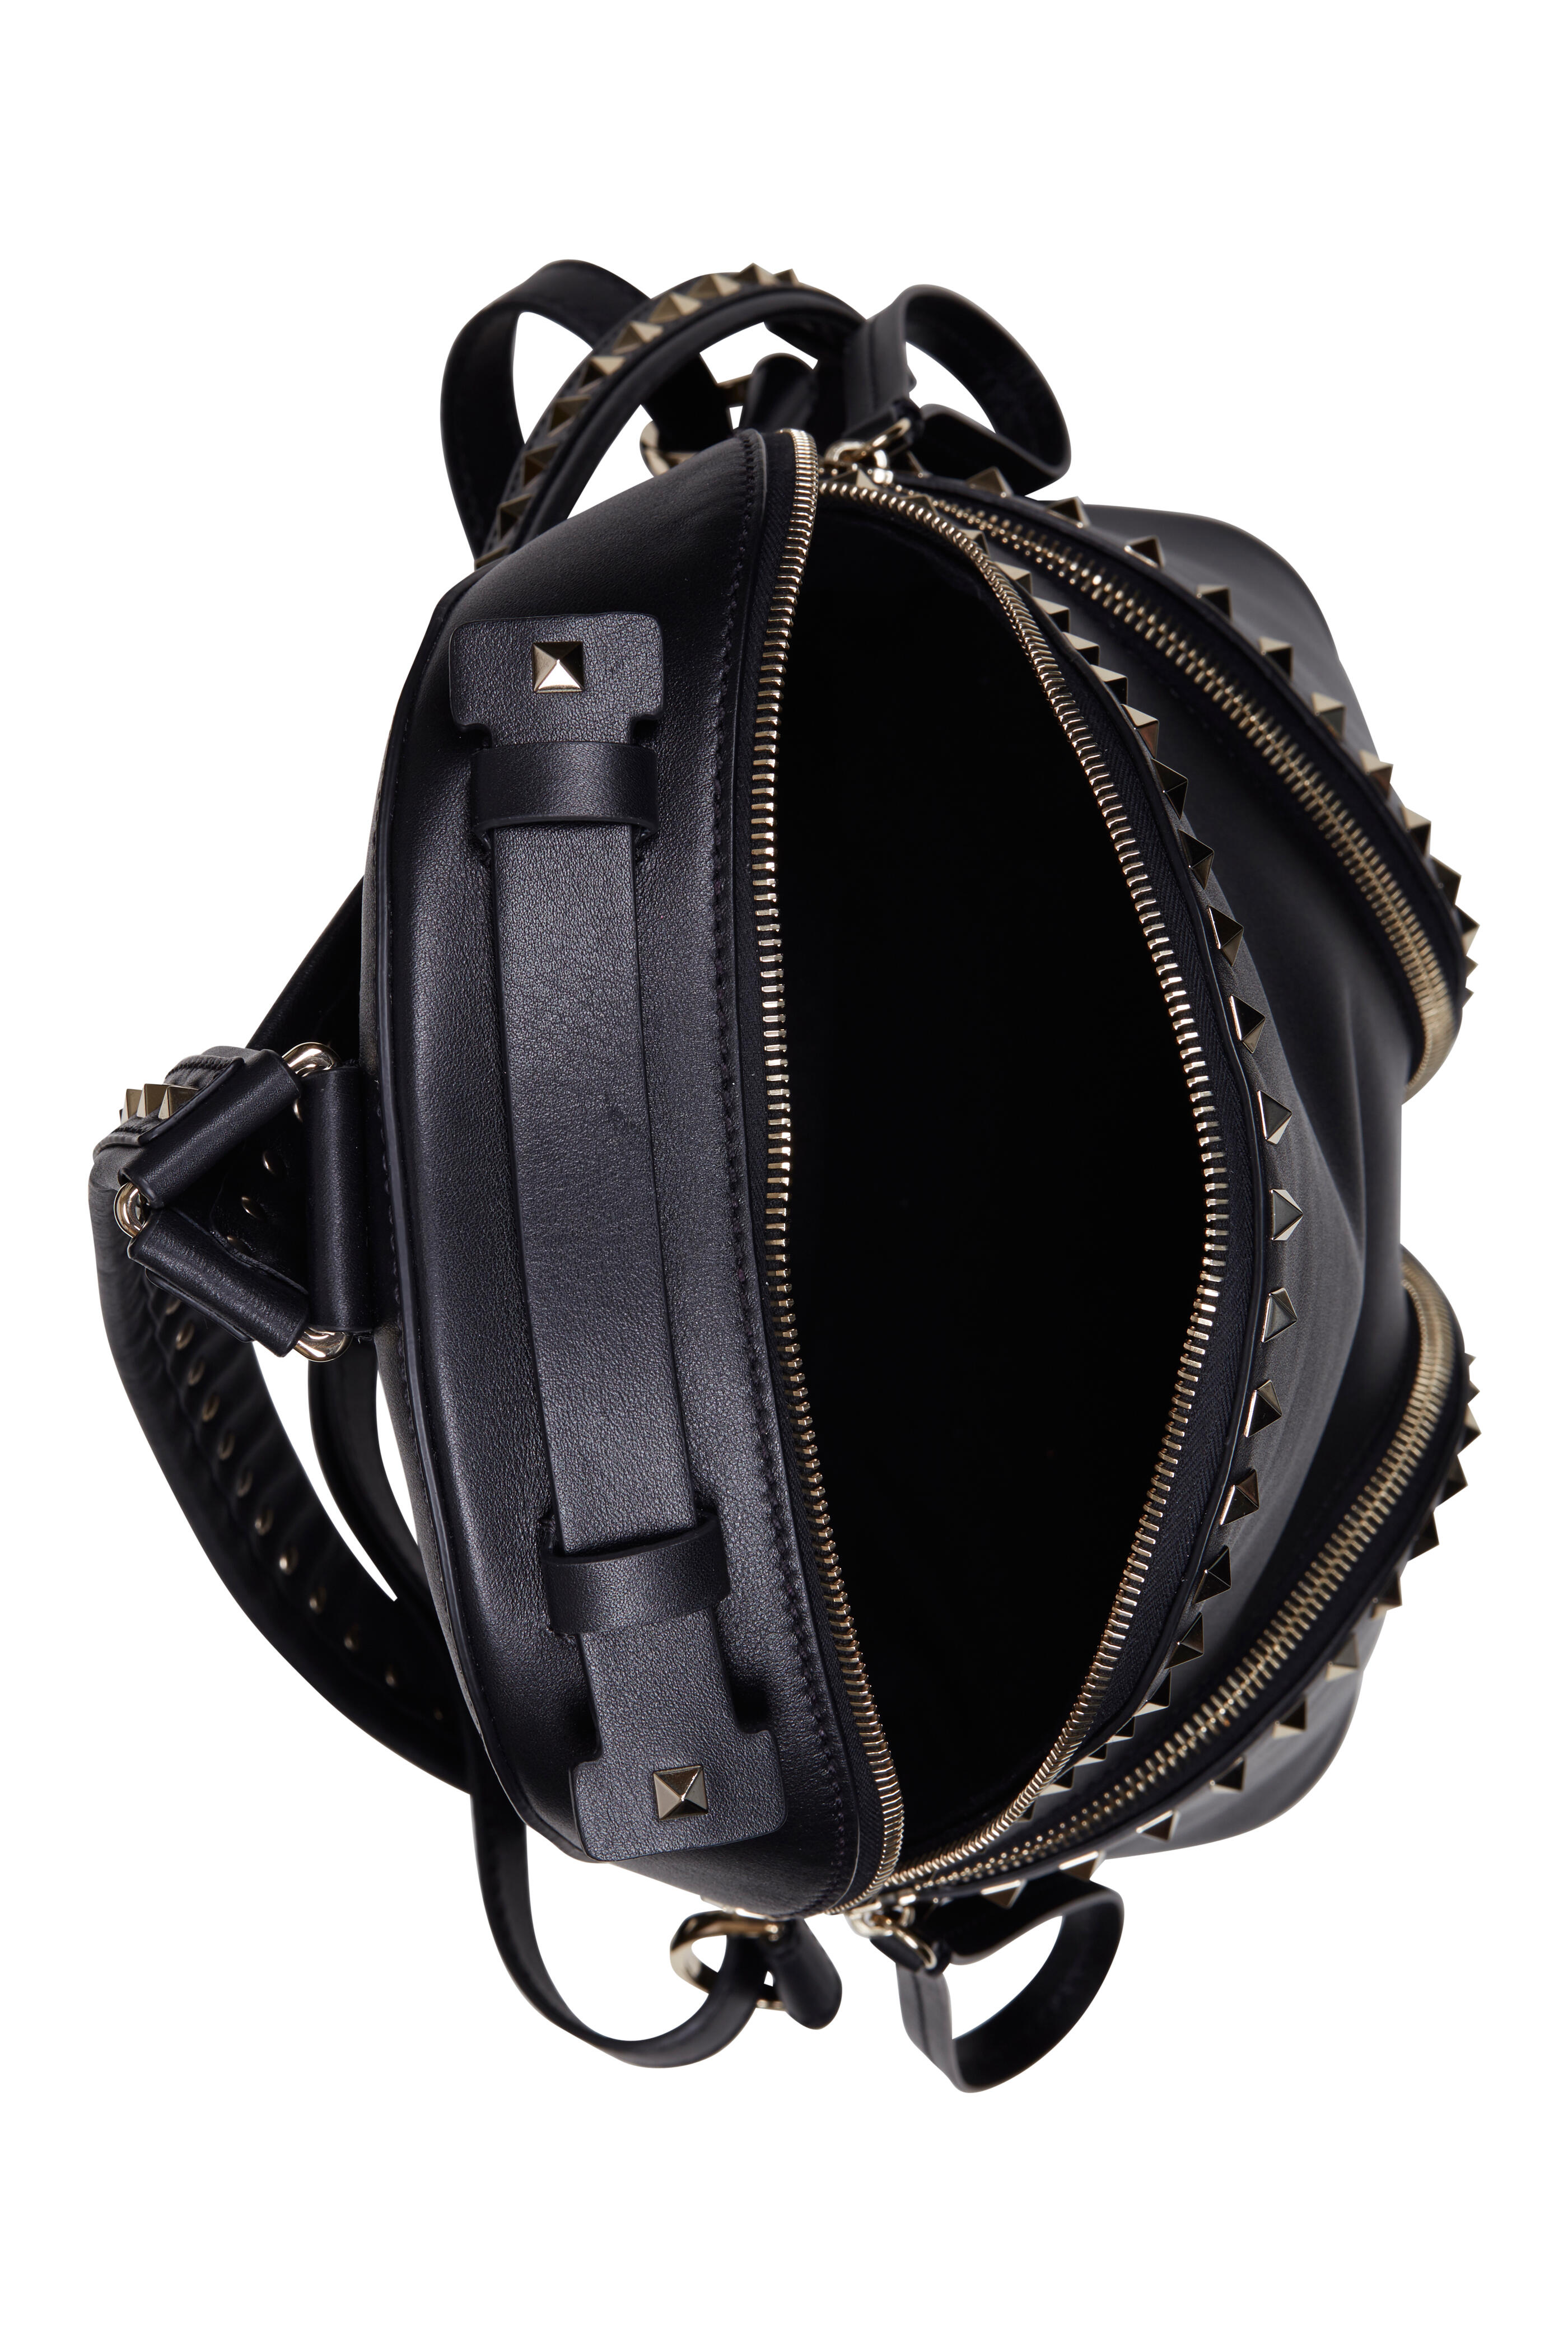 Valentino Rockstud backpack in black quilted leather